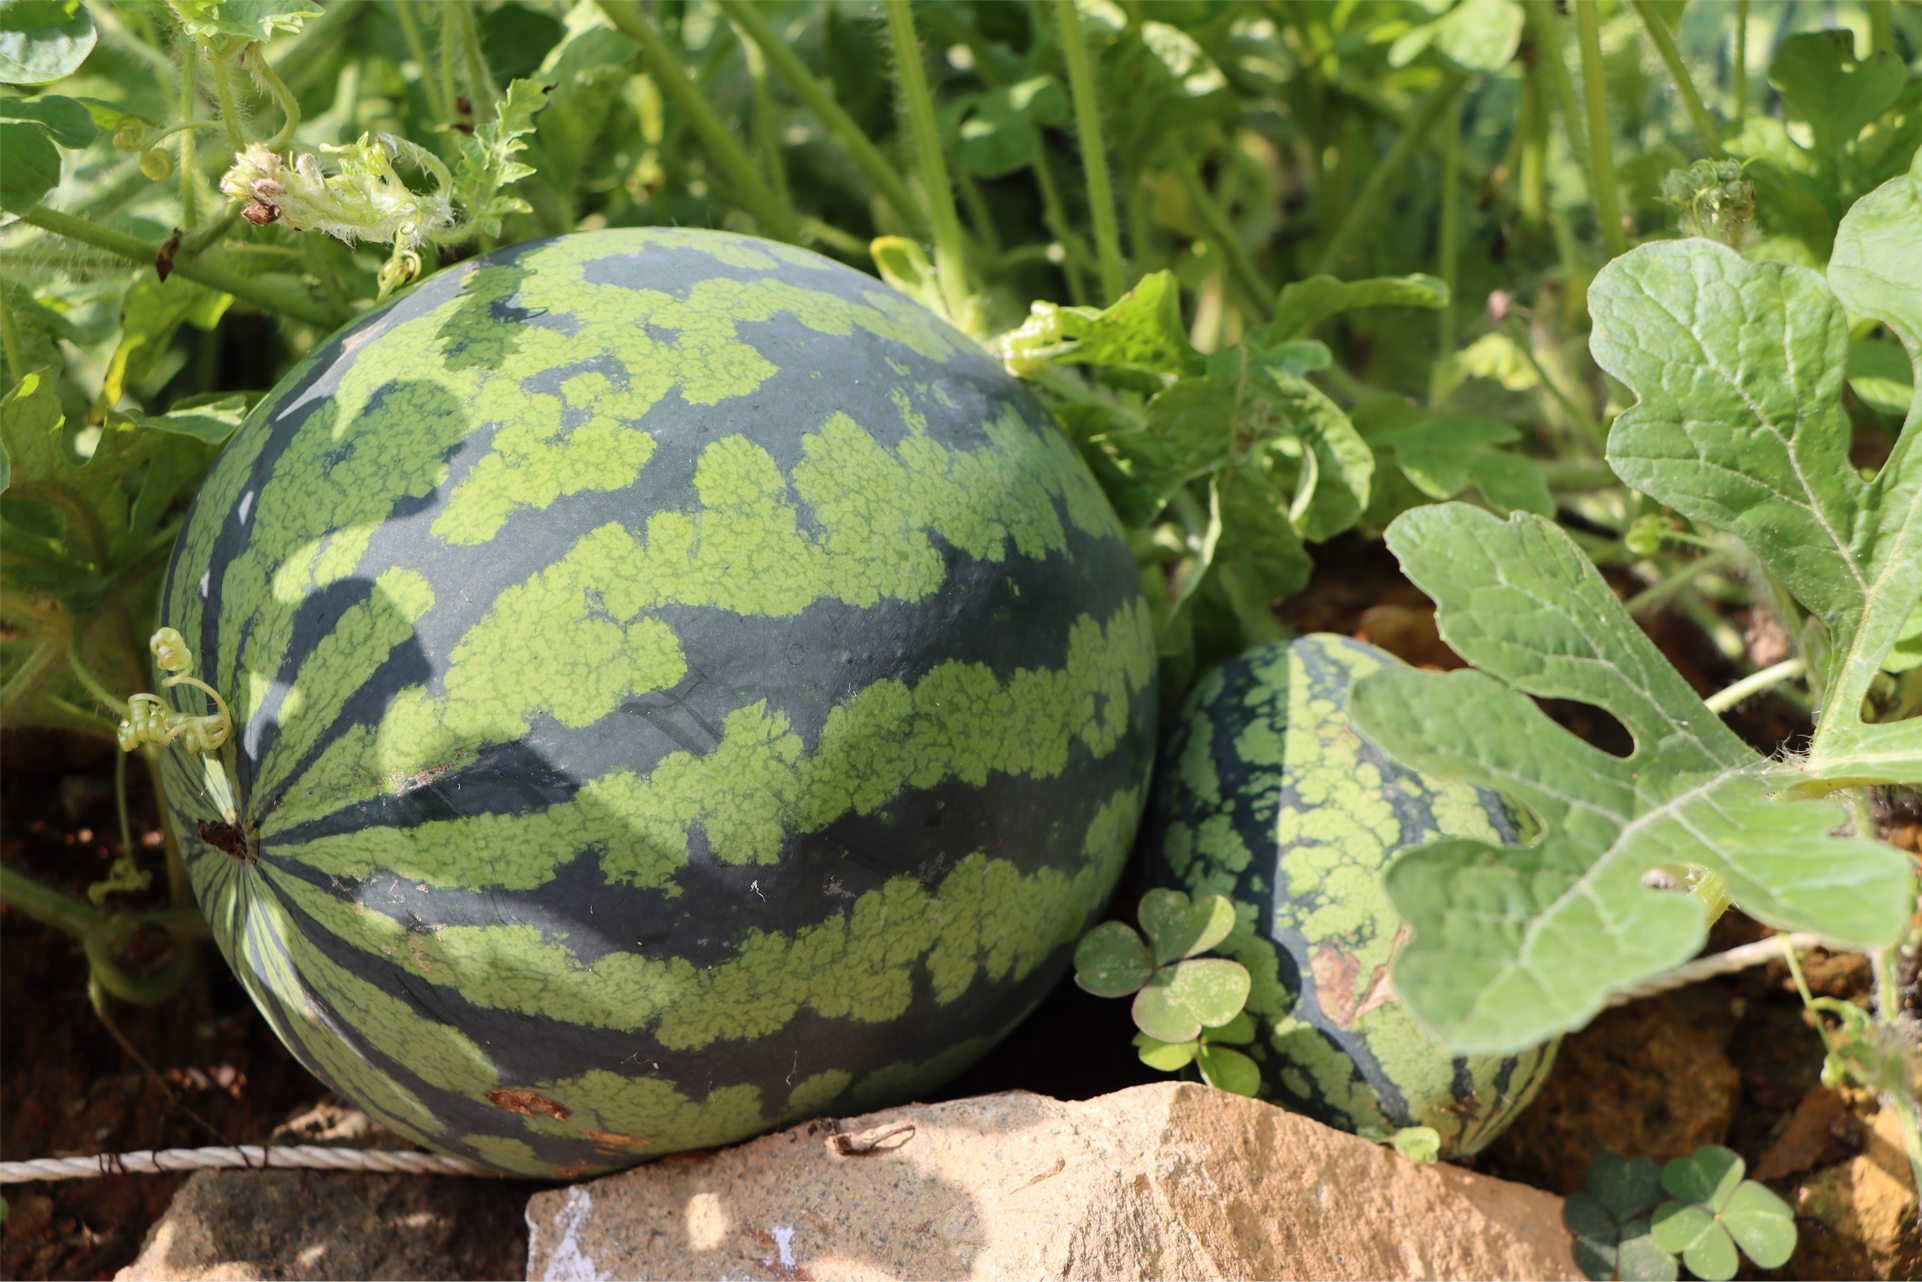 How to Grow Watermelons